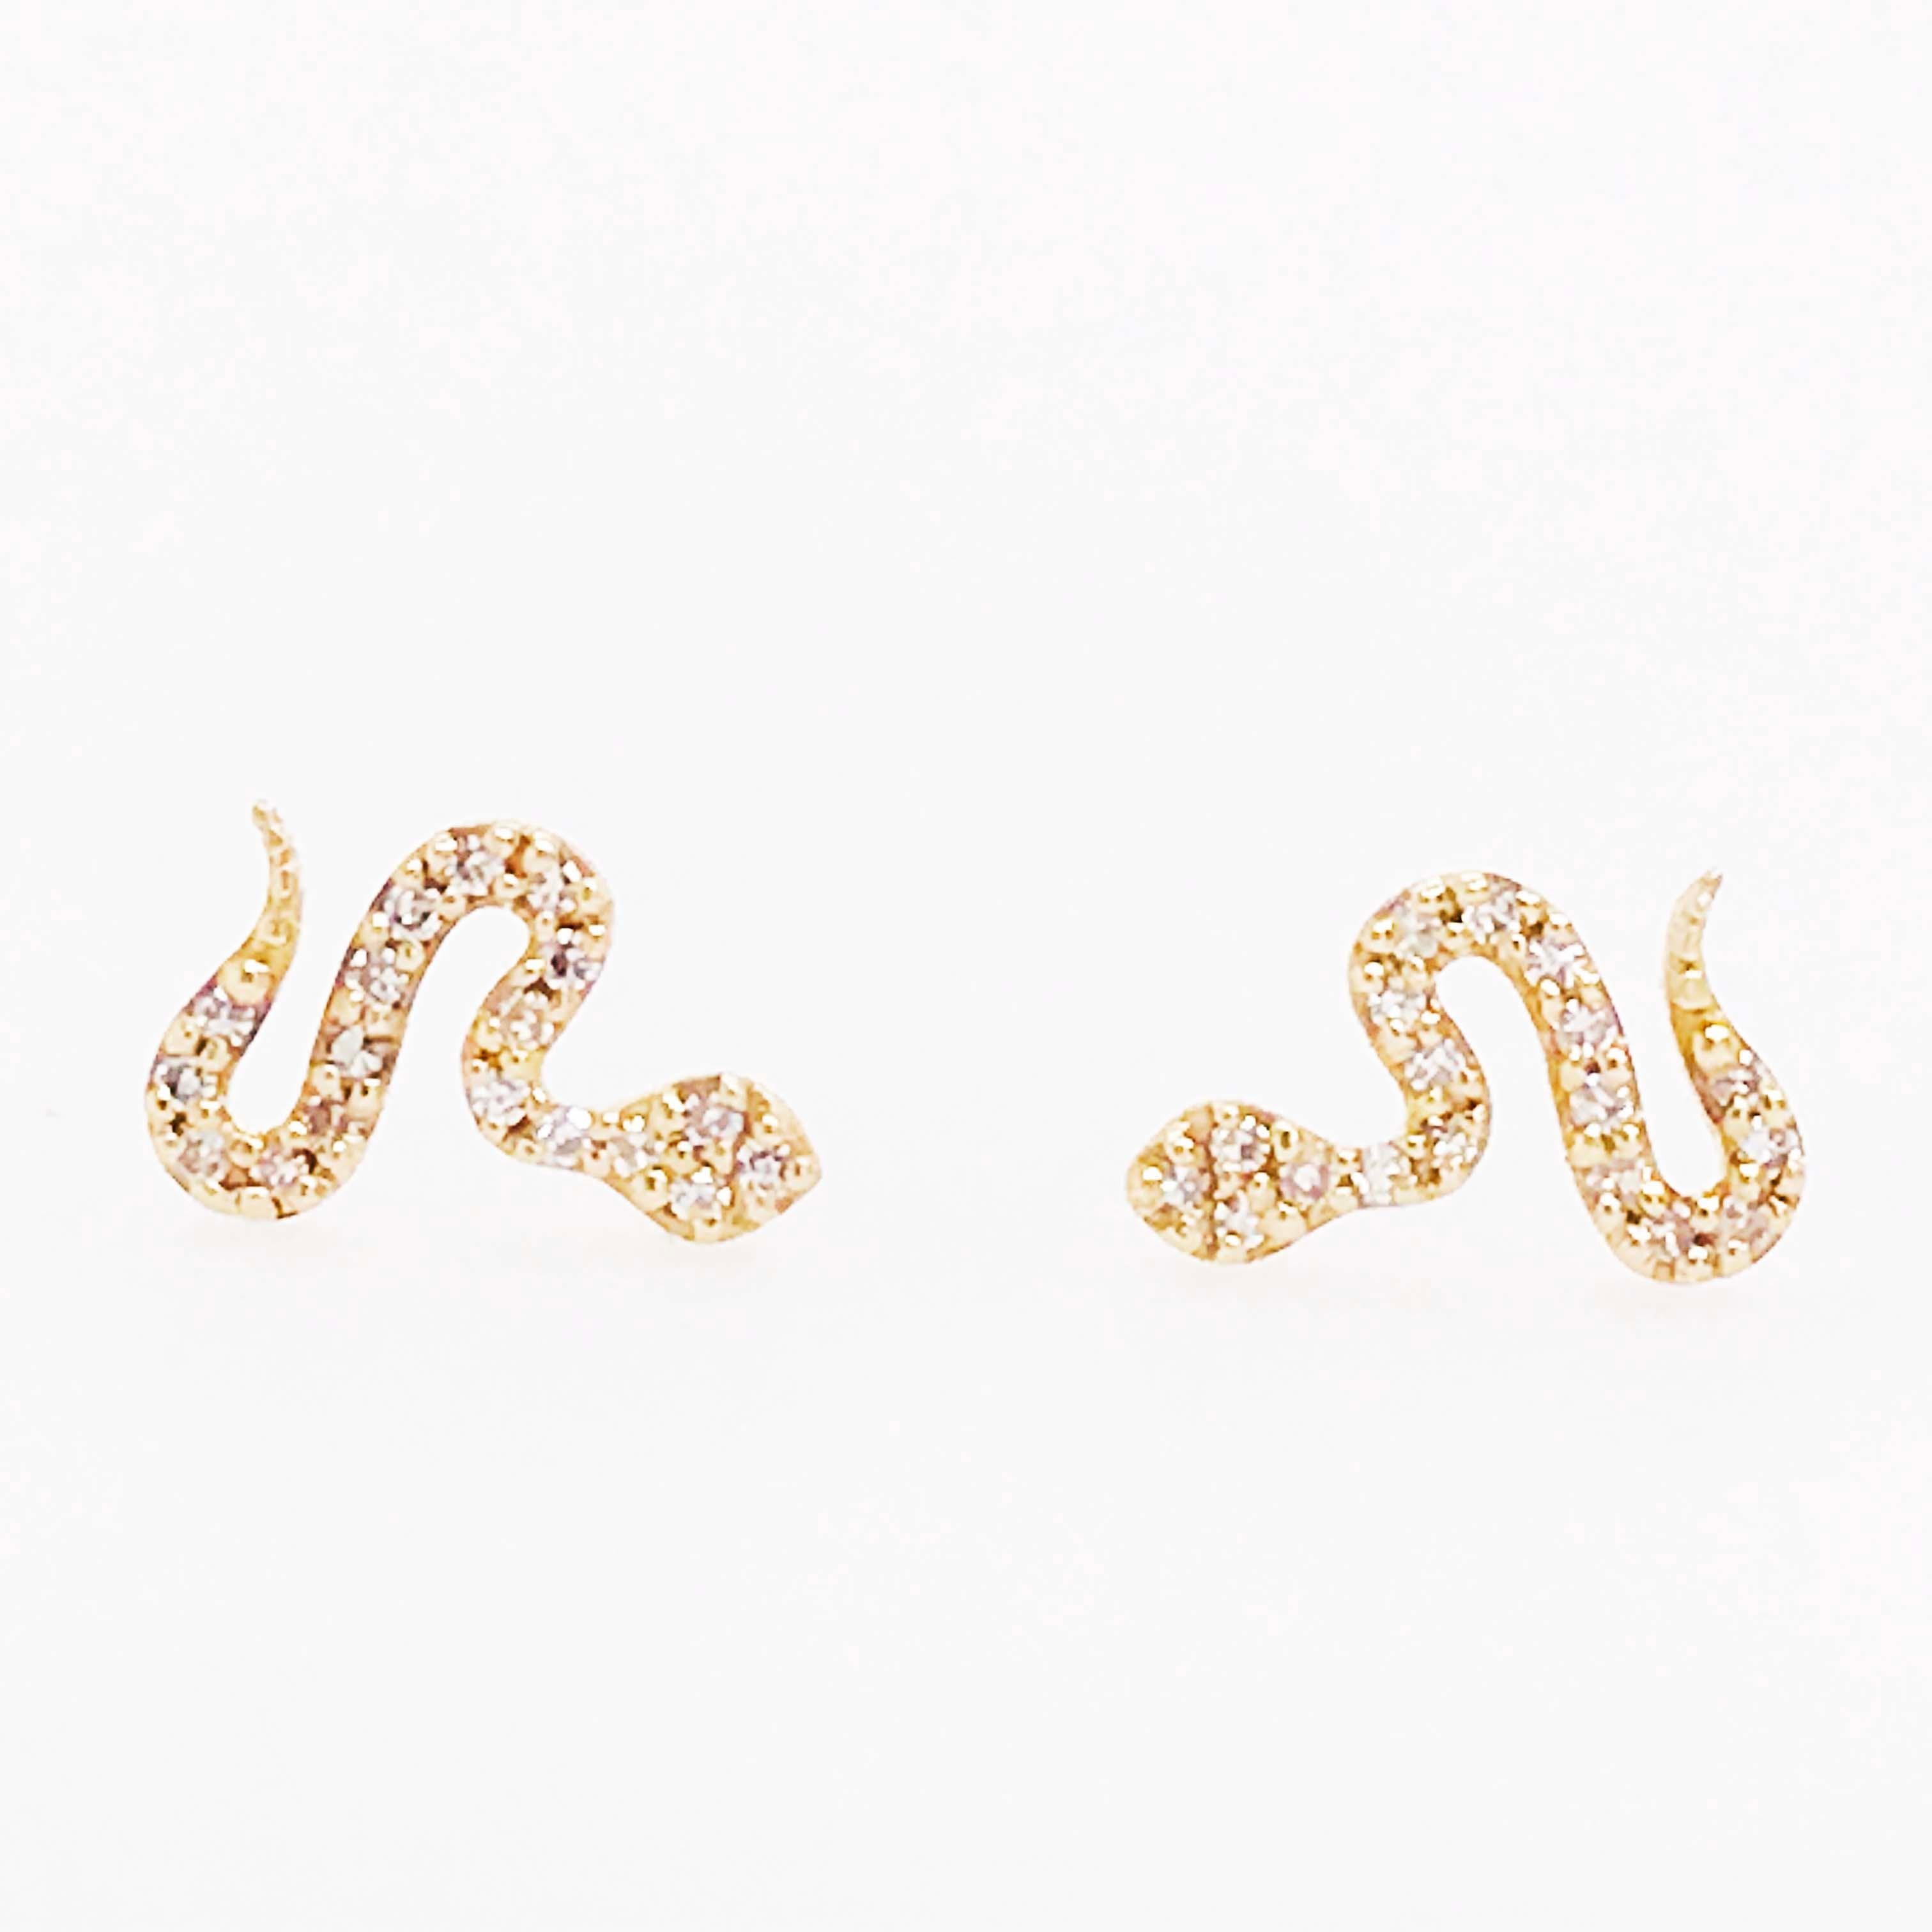 How adorable are these snake earring studs? These dainty diamond snake earrings are so much fun to wear and so adorable! They add character to every attire! The dainty serpent earrings have round brilliant diamonds pave set on the top on the